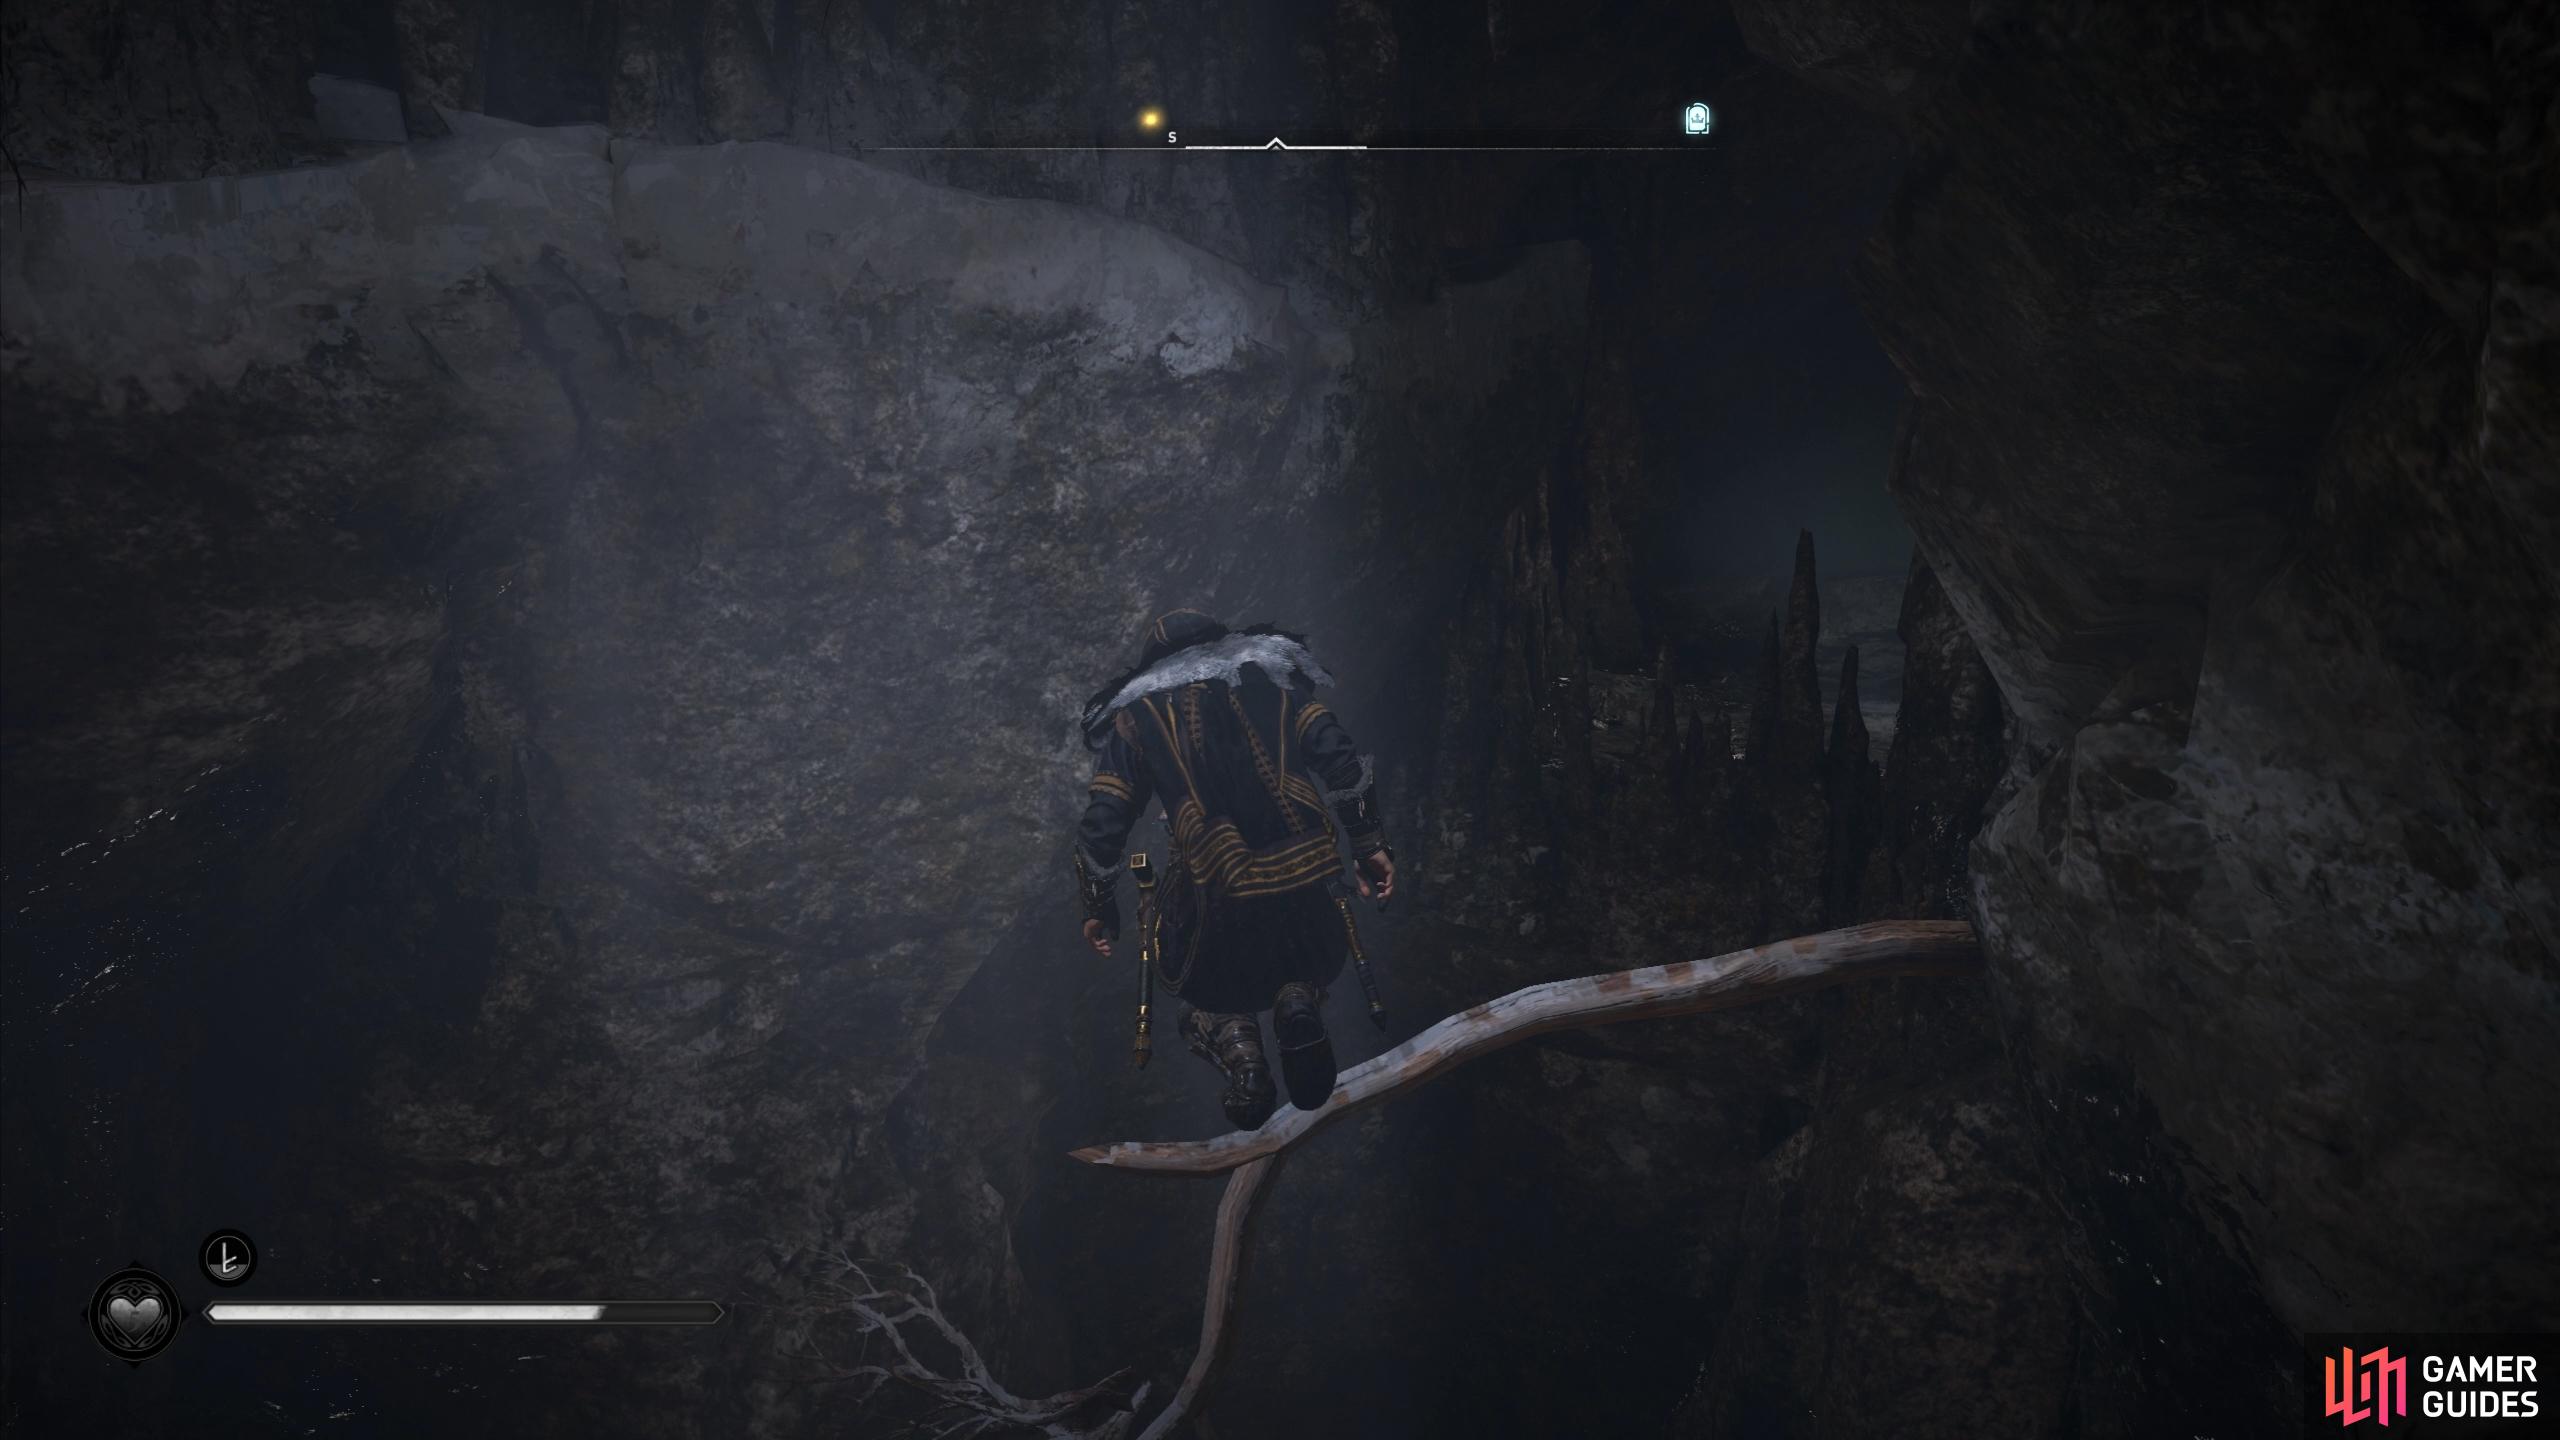 Youll need to jump to the branch jutting out of the rock to reach the other side of the cavern.